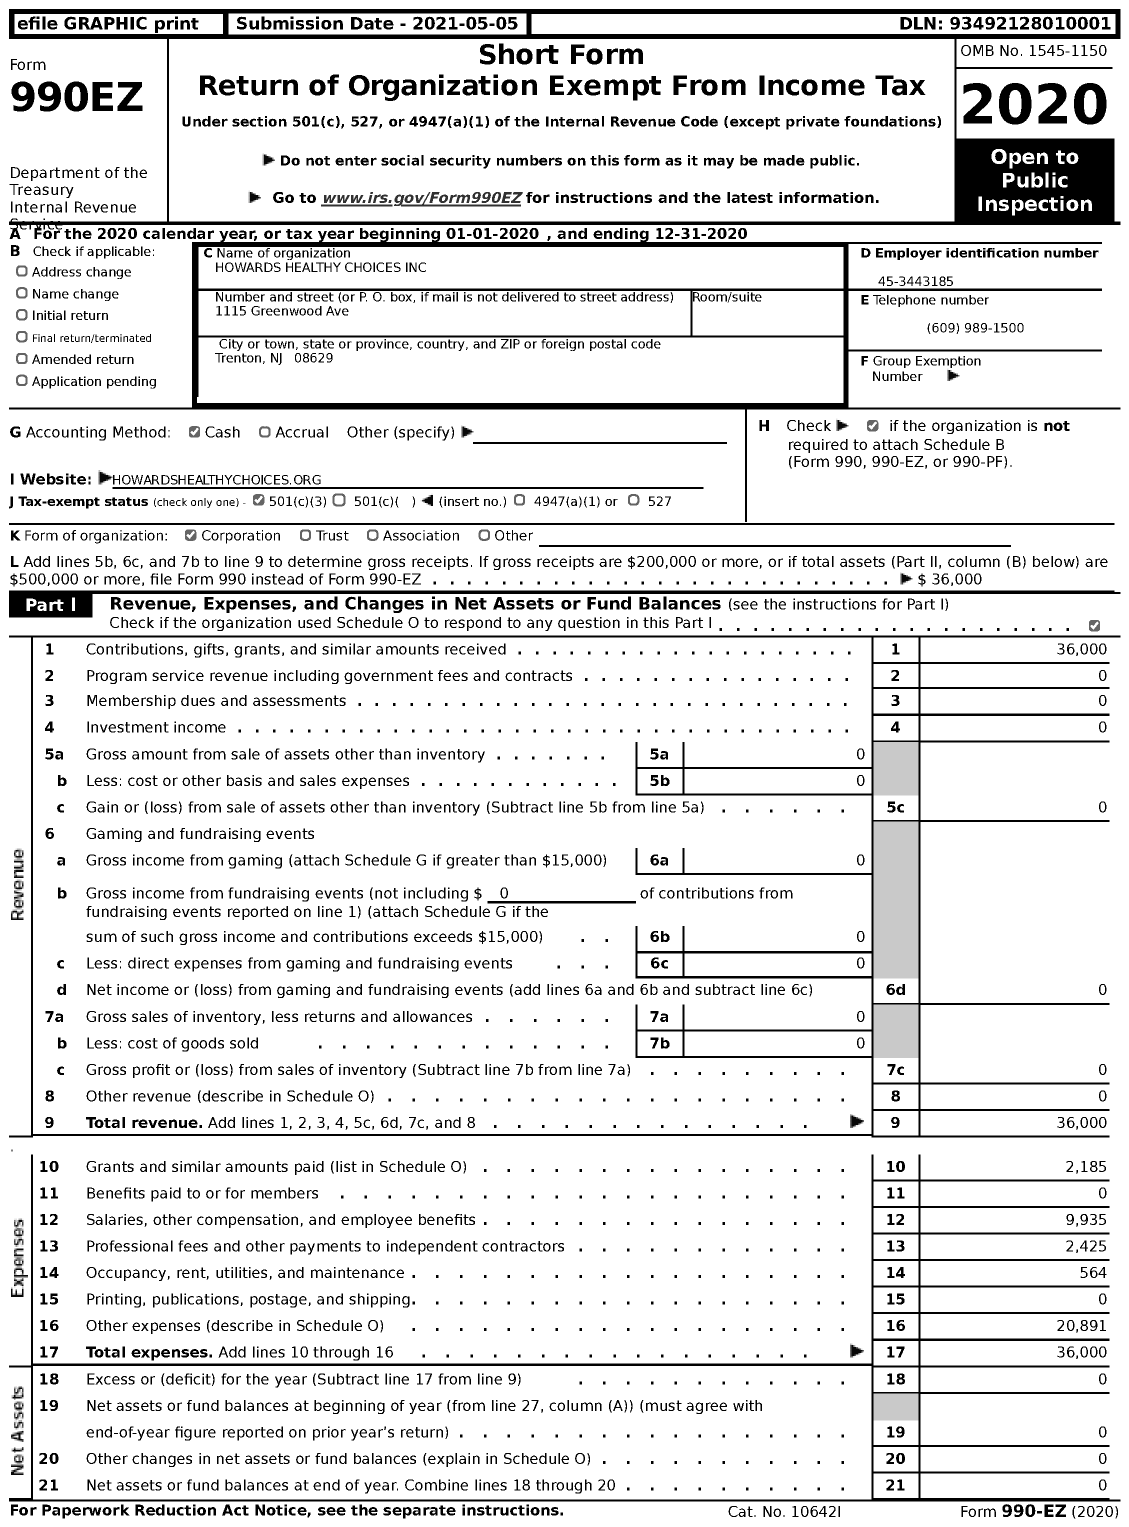 Image of first page of 2020 Form 990EZ for Howards Healthy Choices